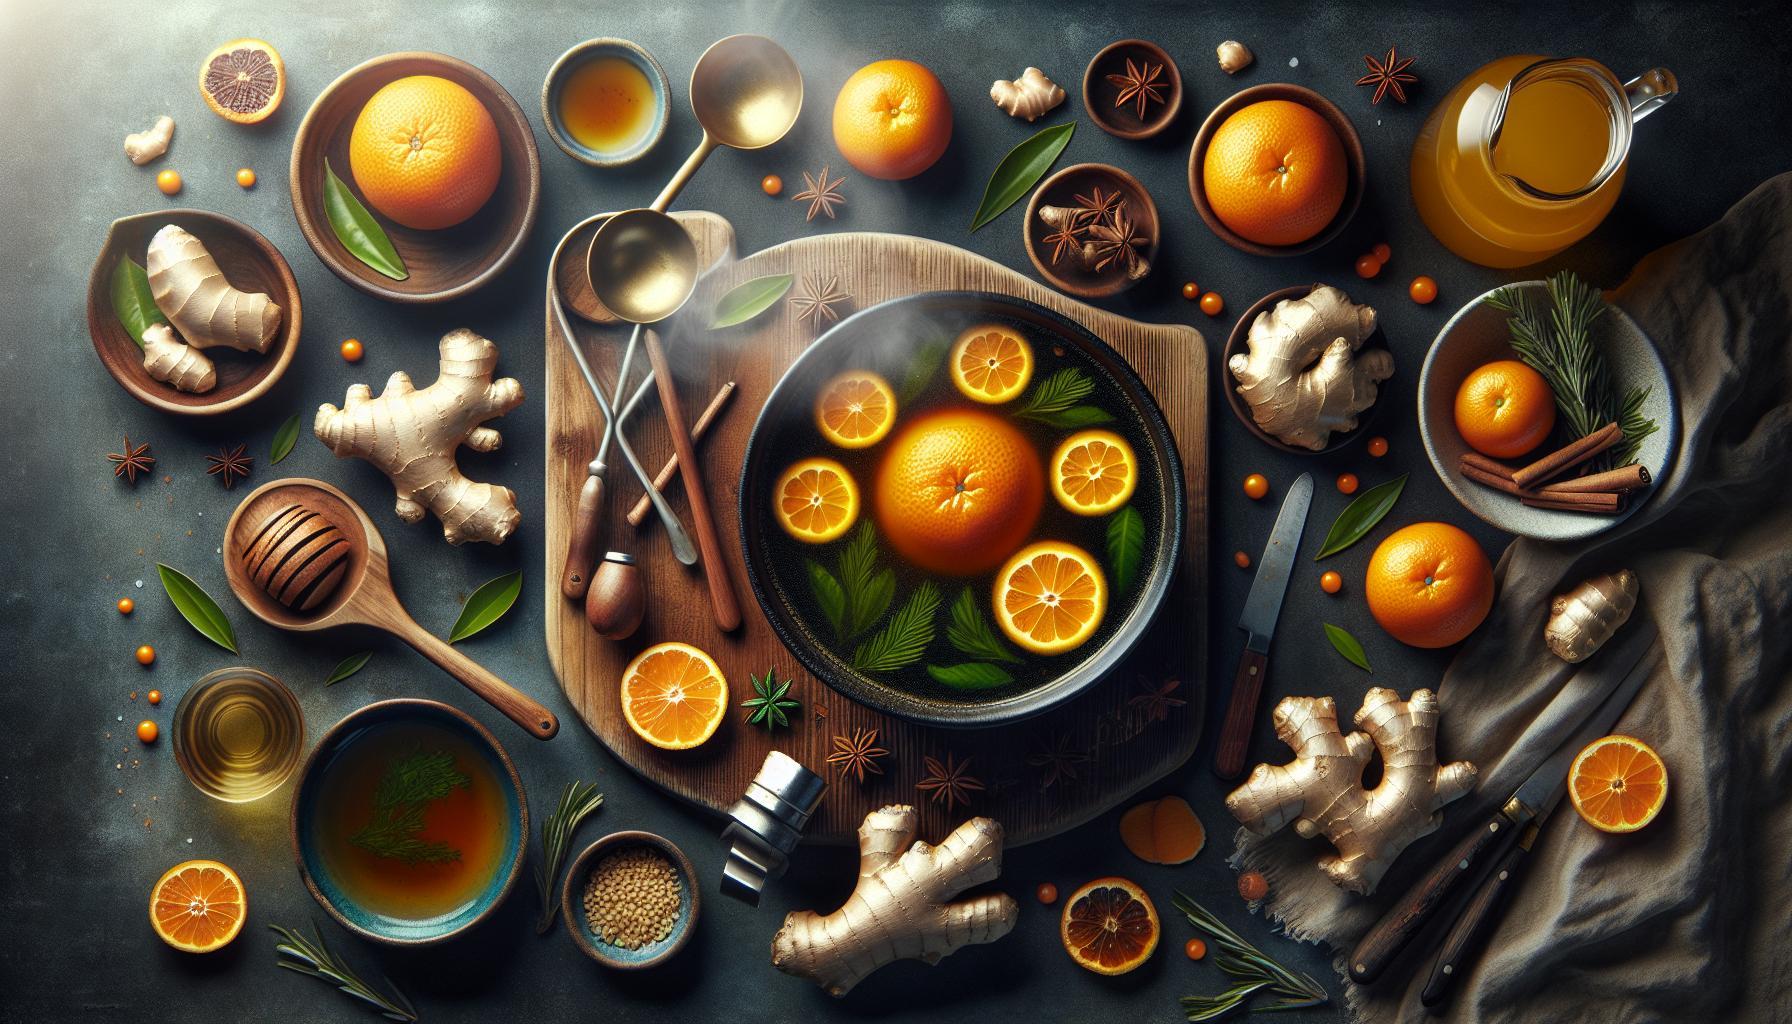 Zesty Tangerine Ginger Sipping Broth: A Refreshing Twist on a Healthy Recipe